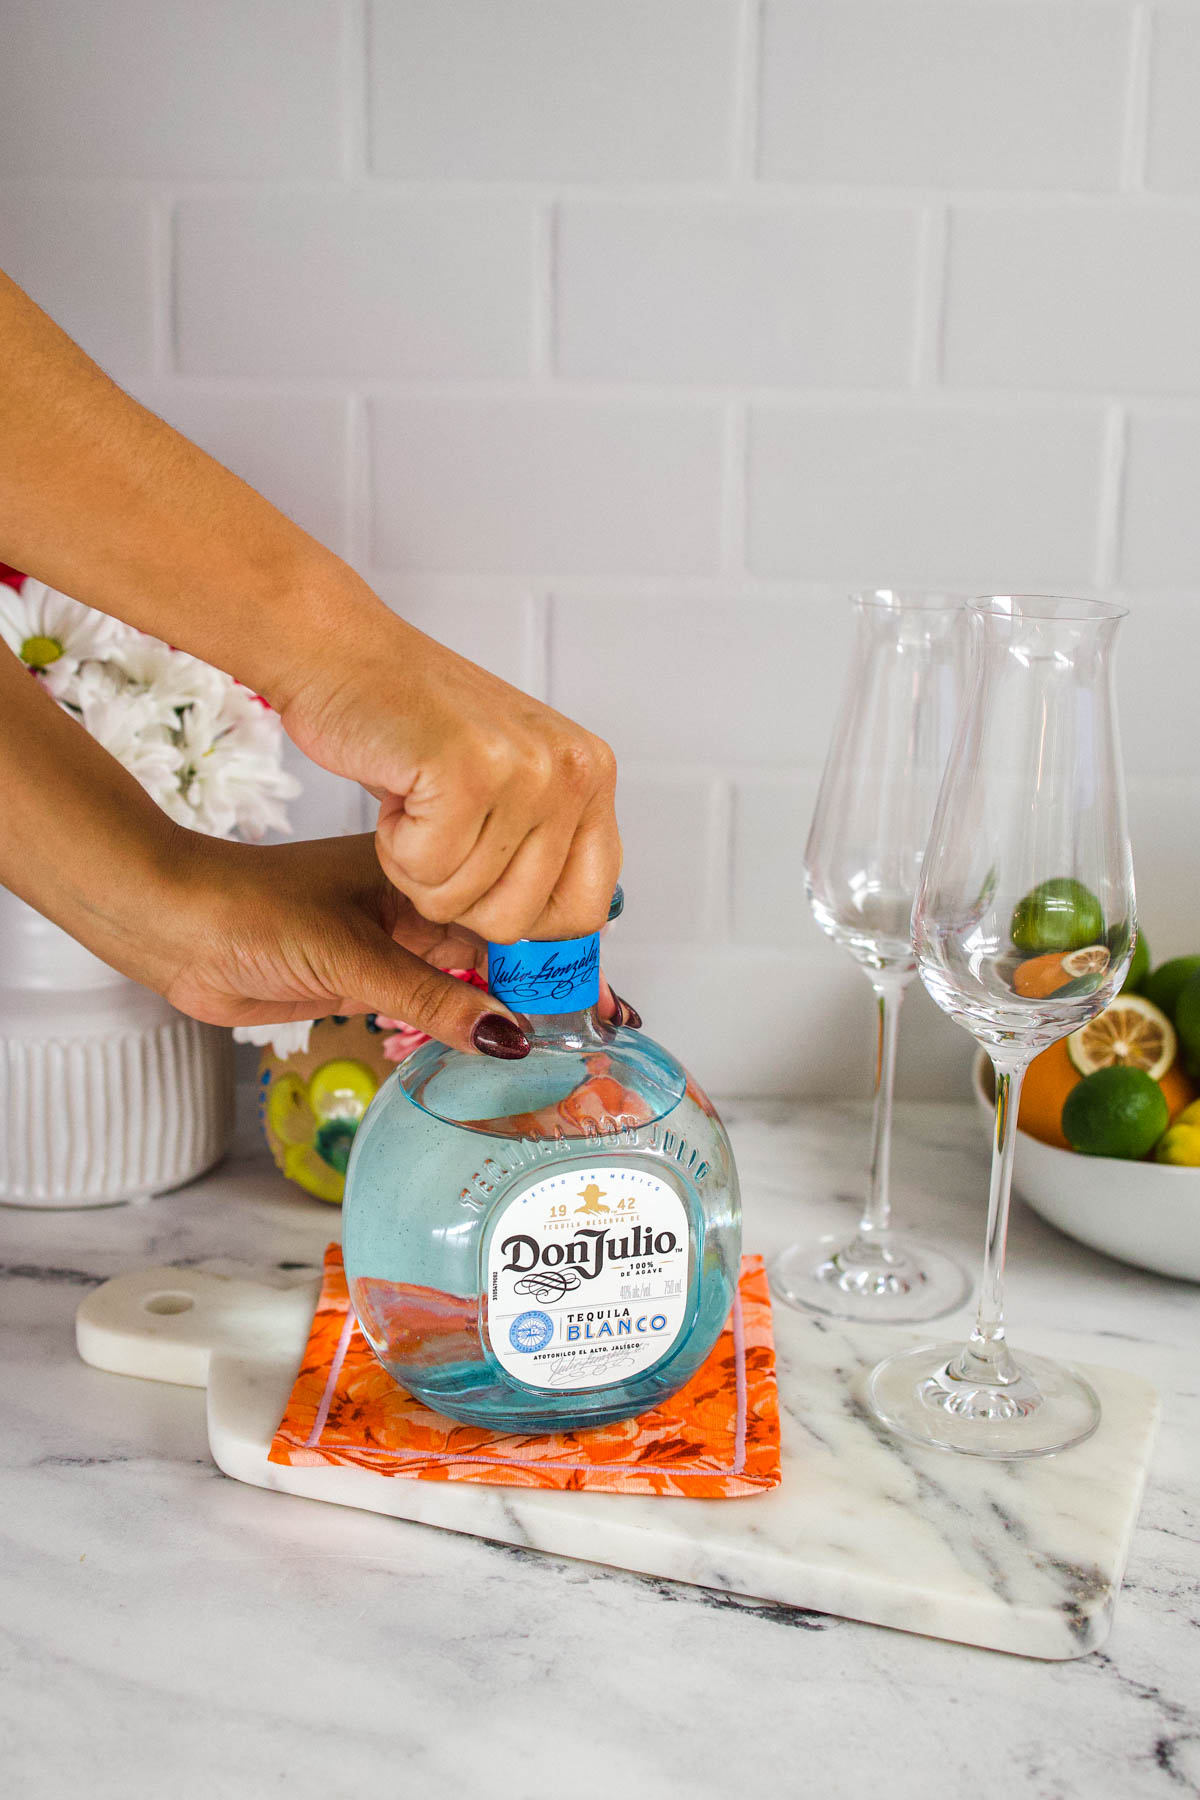 A hand opening a bottle of Don Julio Blanco Tequila right beside two flute glasses on a marble countertop.